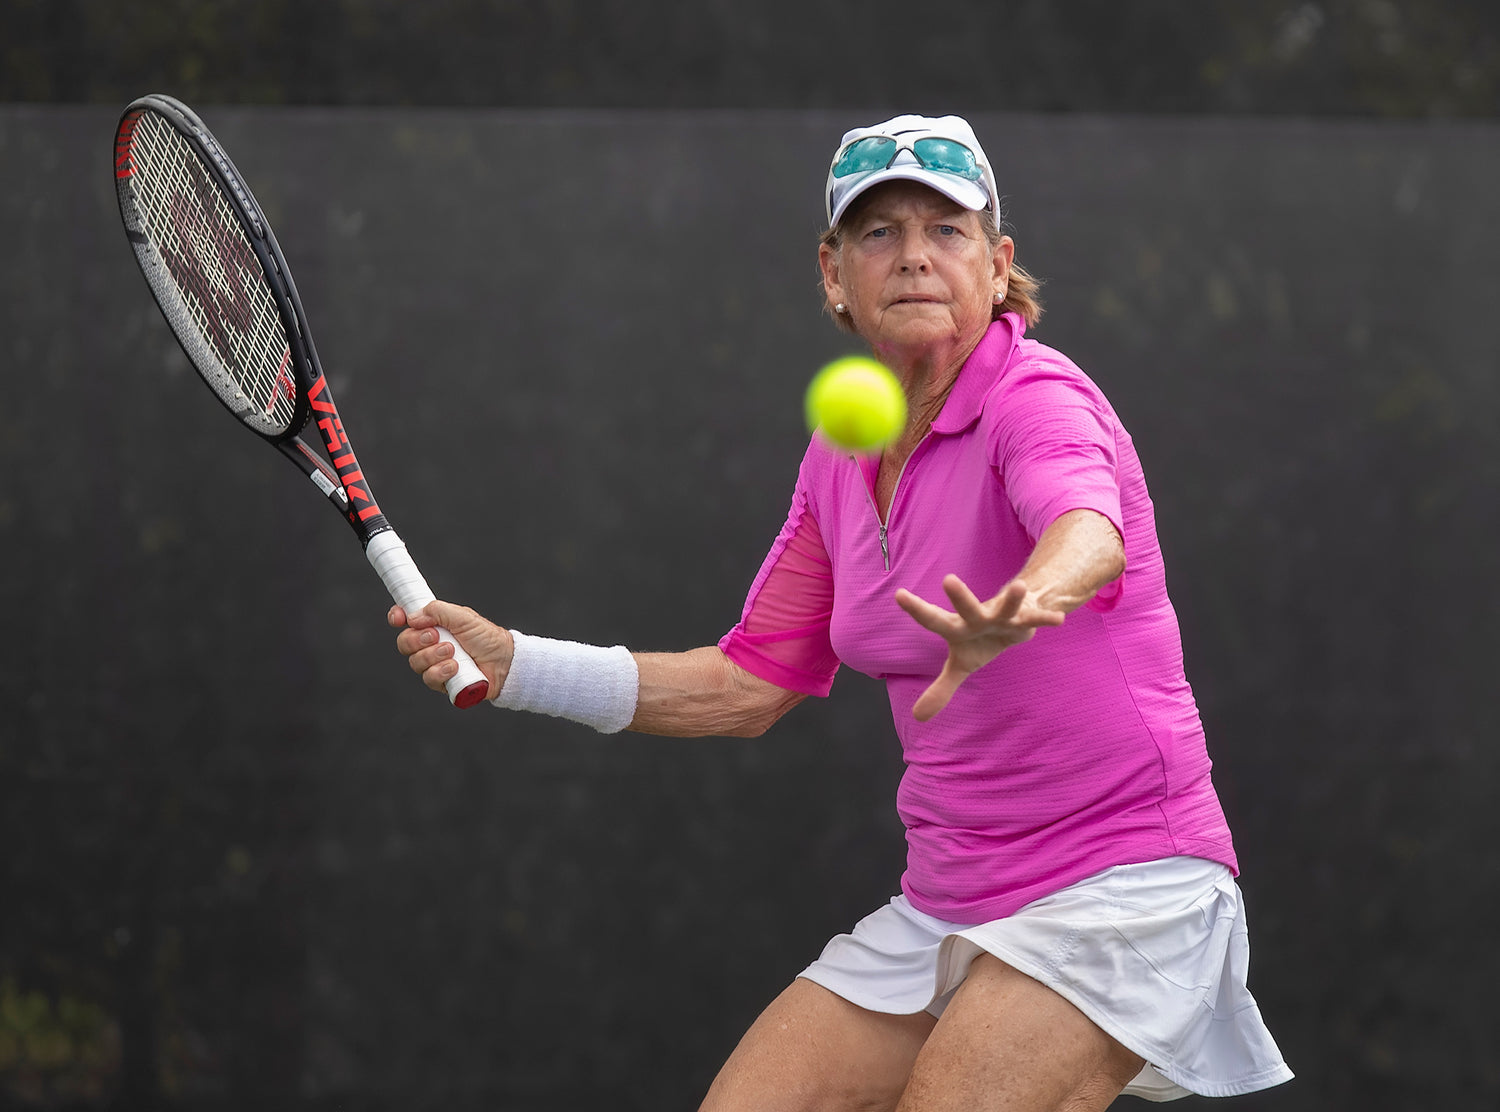 Record-winning ITF Masters player reflects on illustrious performances